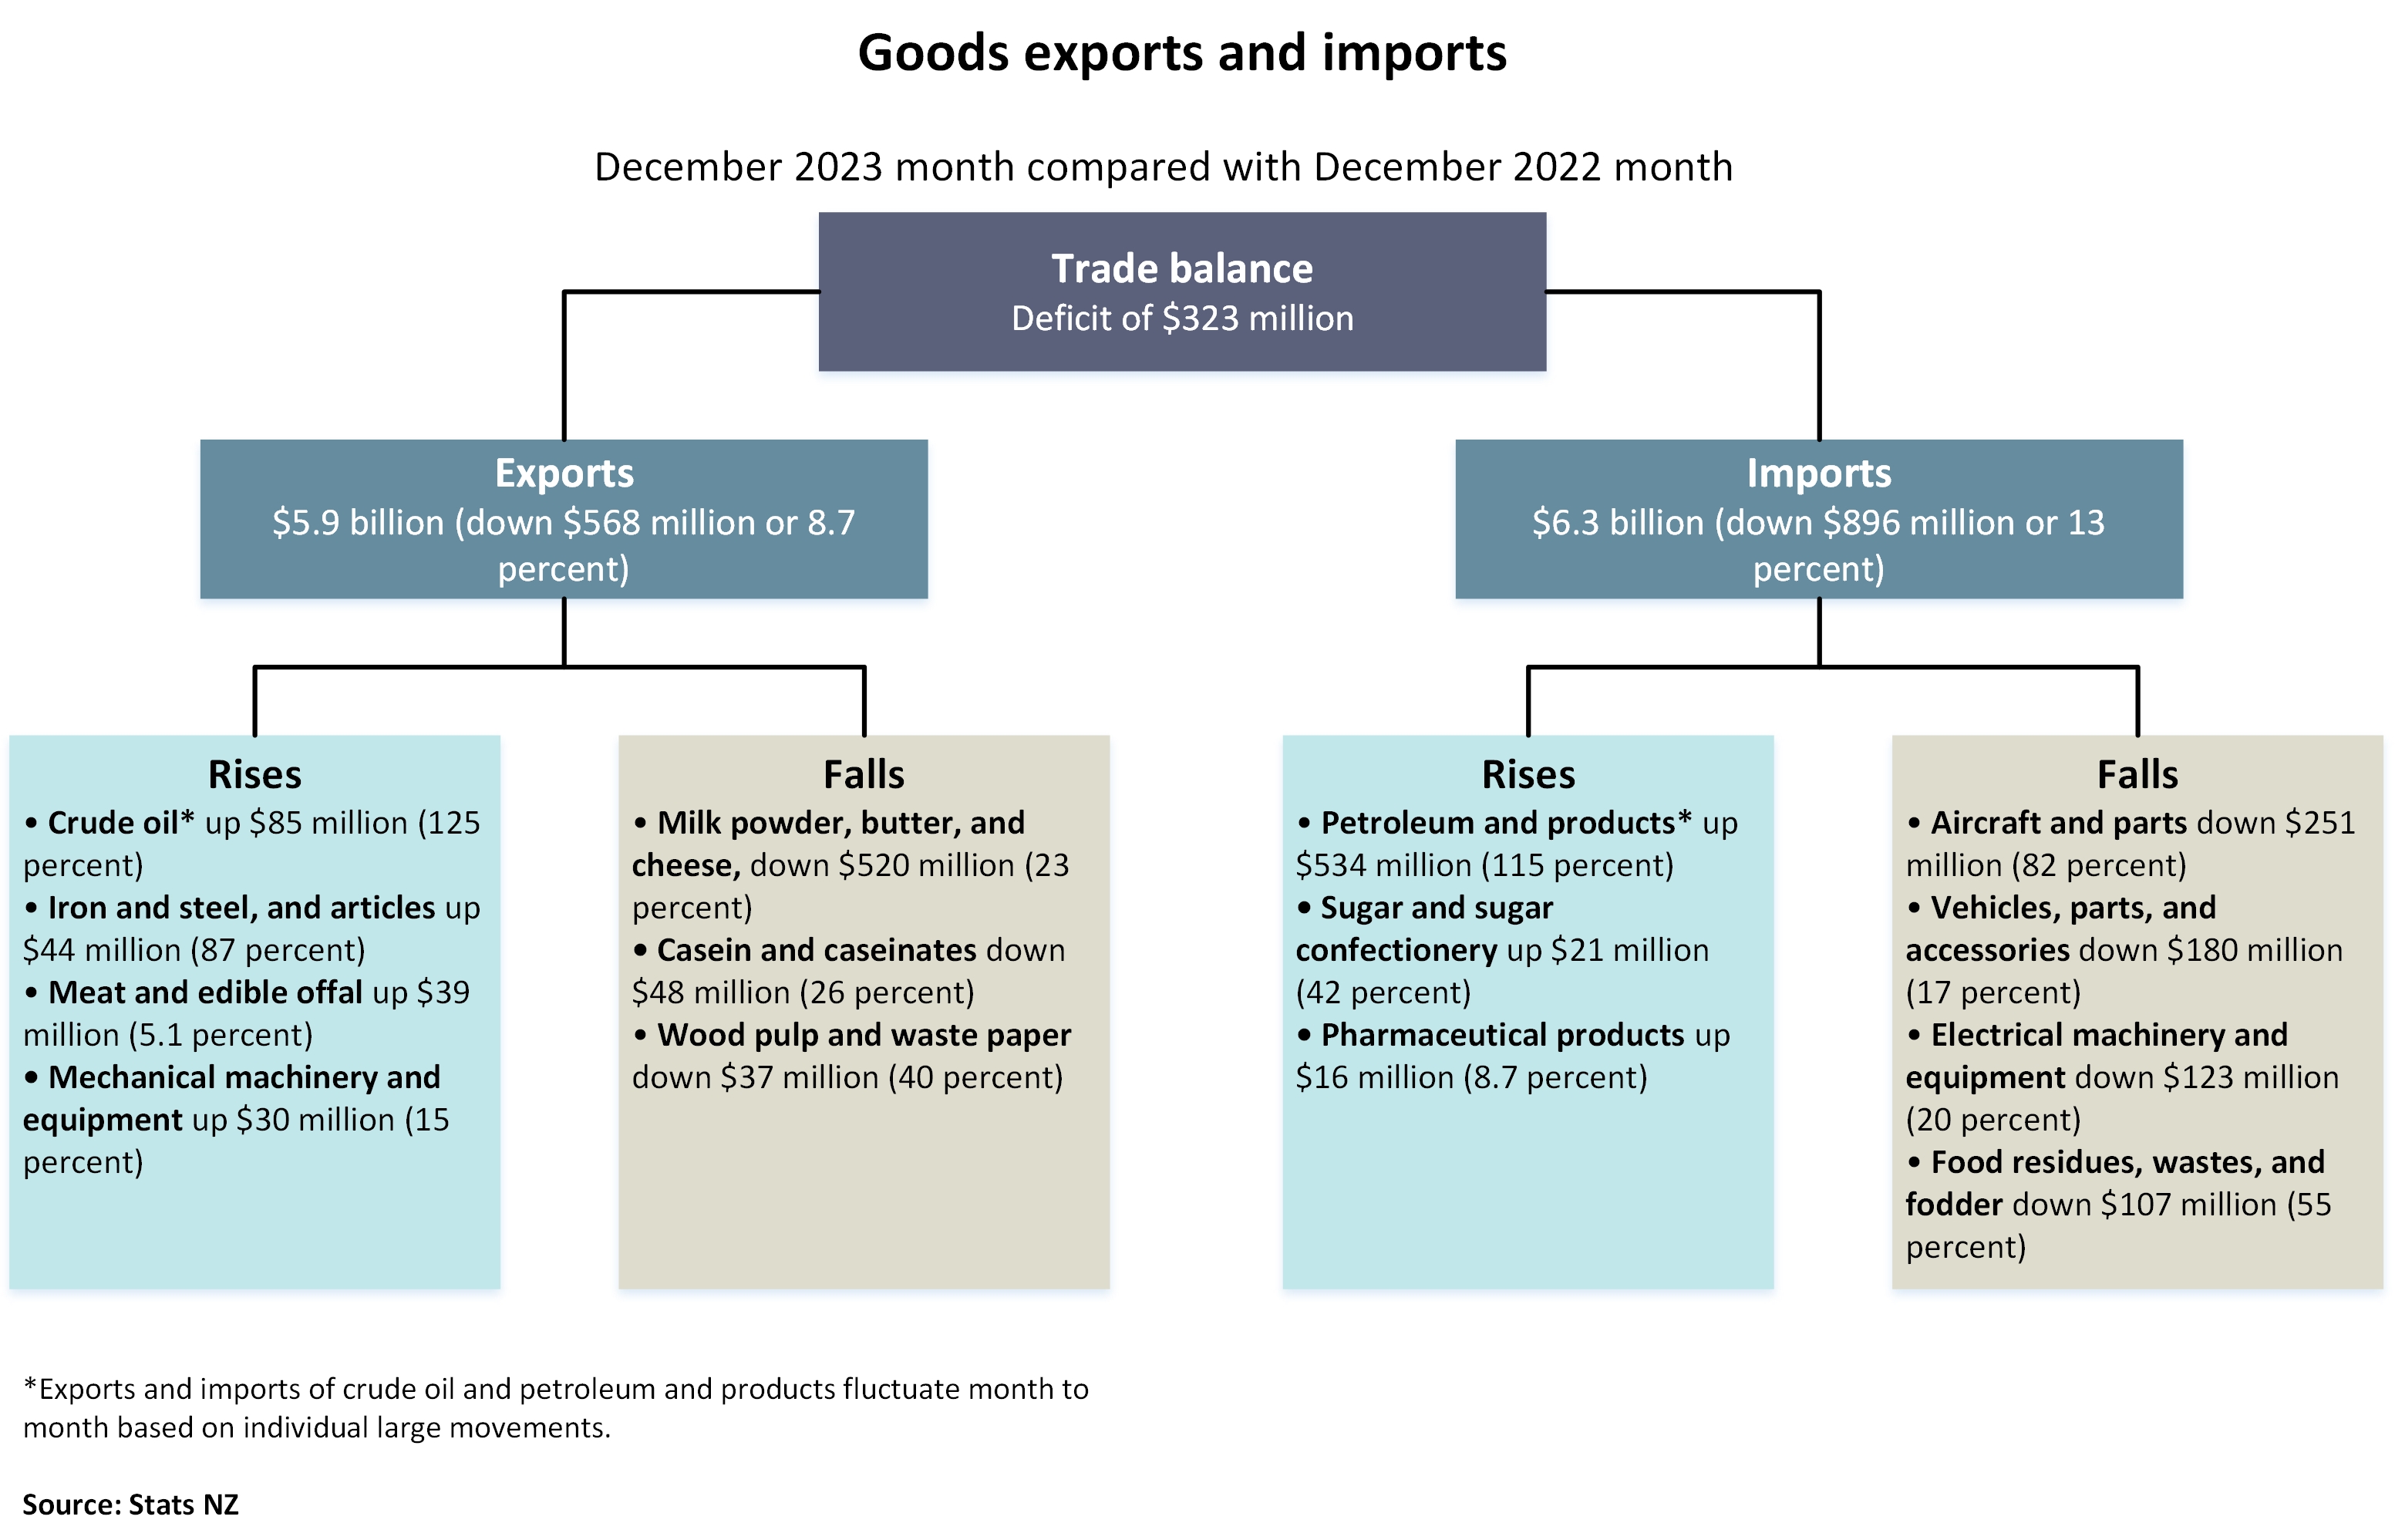 Diagram showing goods exports and imports, December 2023 month compared with December 2022 month. Text alternative available below diagram.